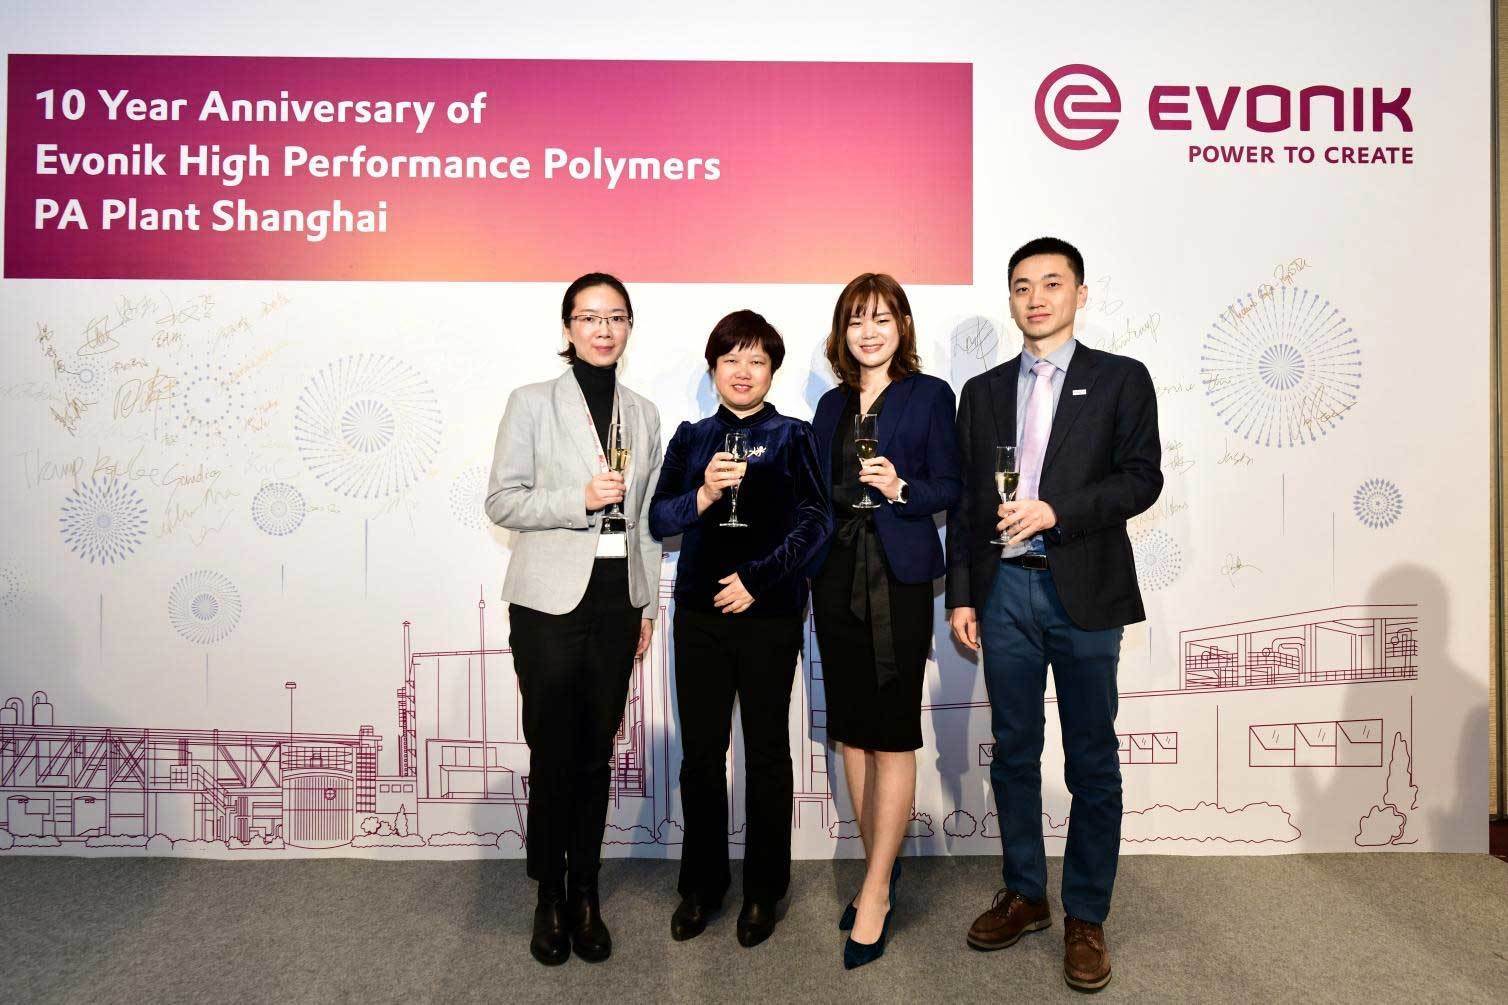 Participate in the 2019 Evonik 10th Anniversary Annual Meeting